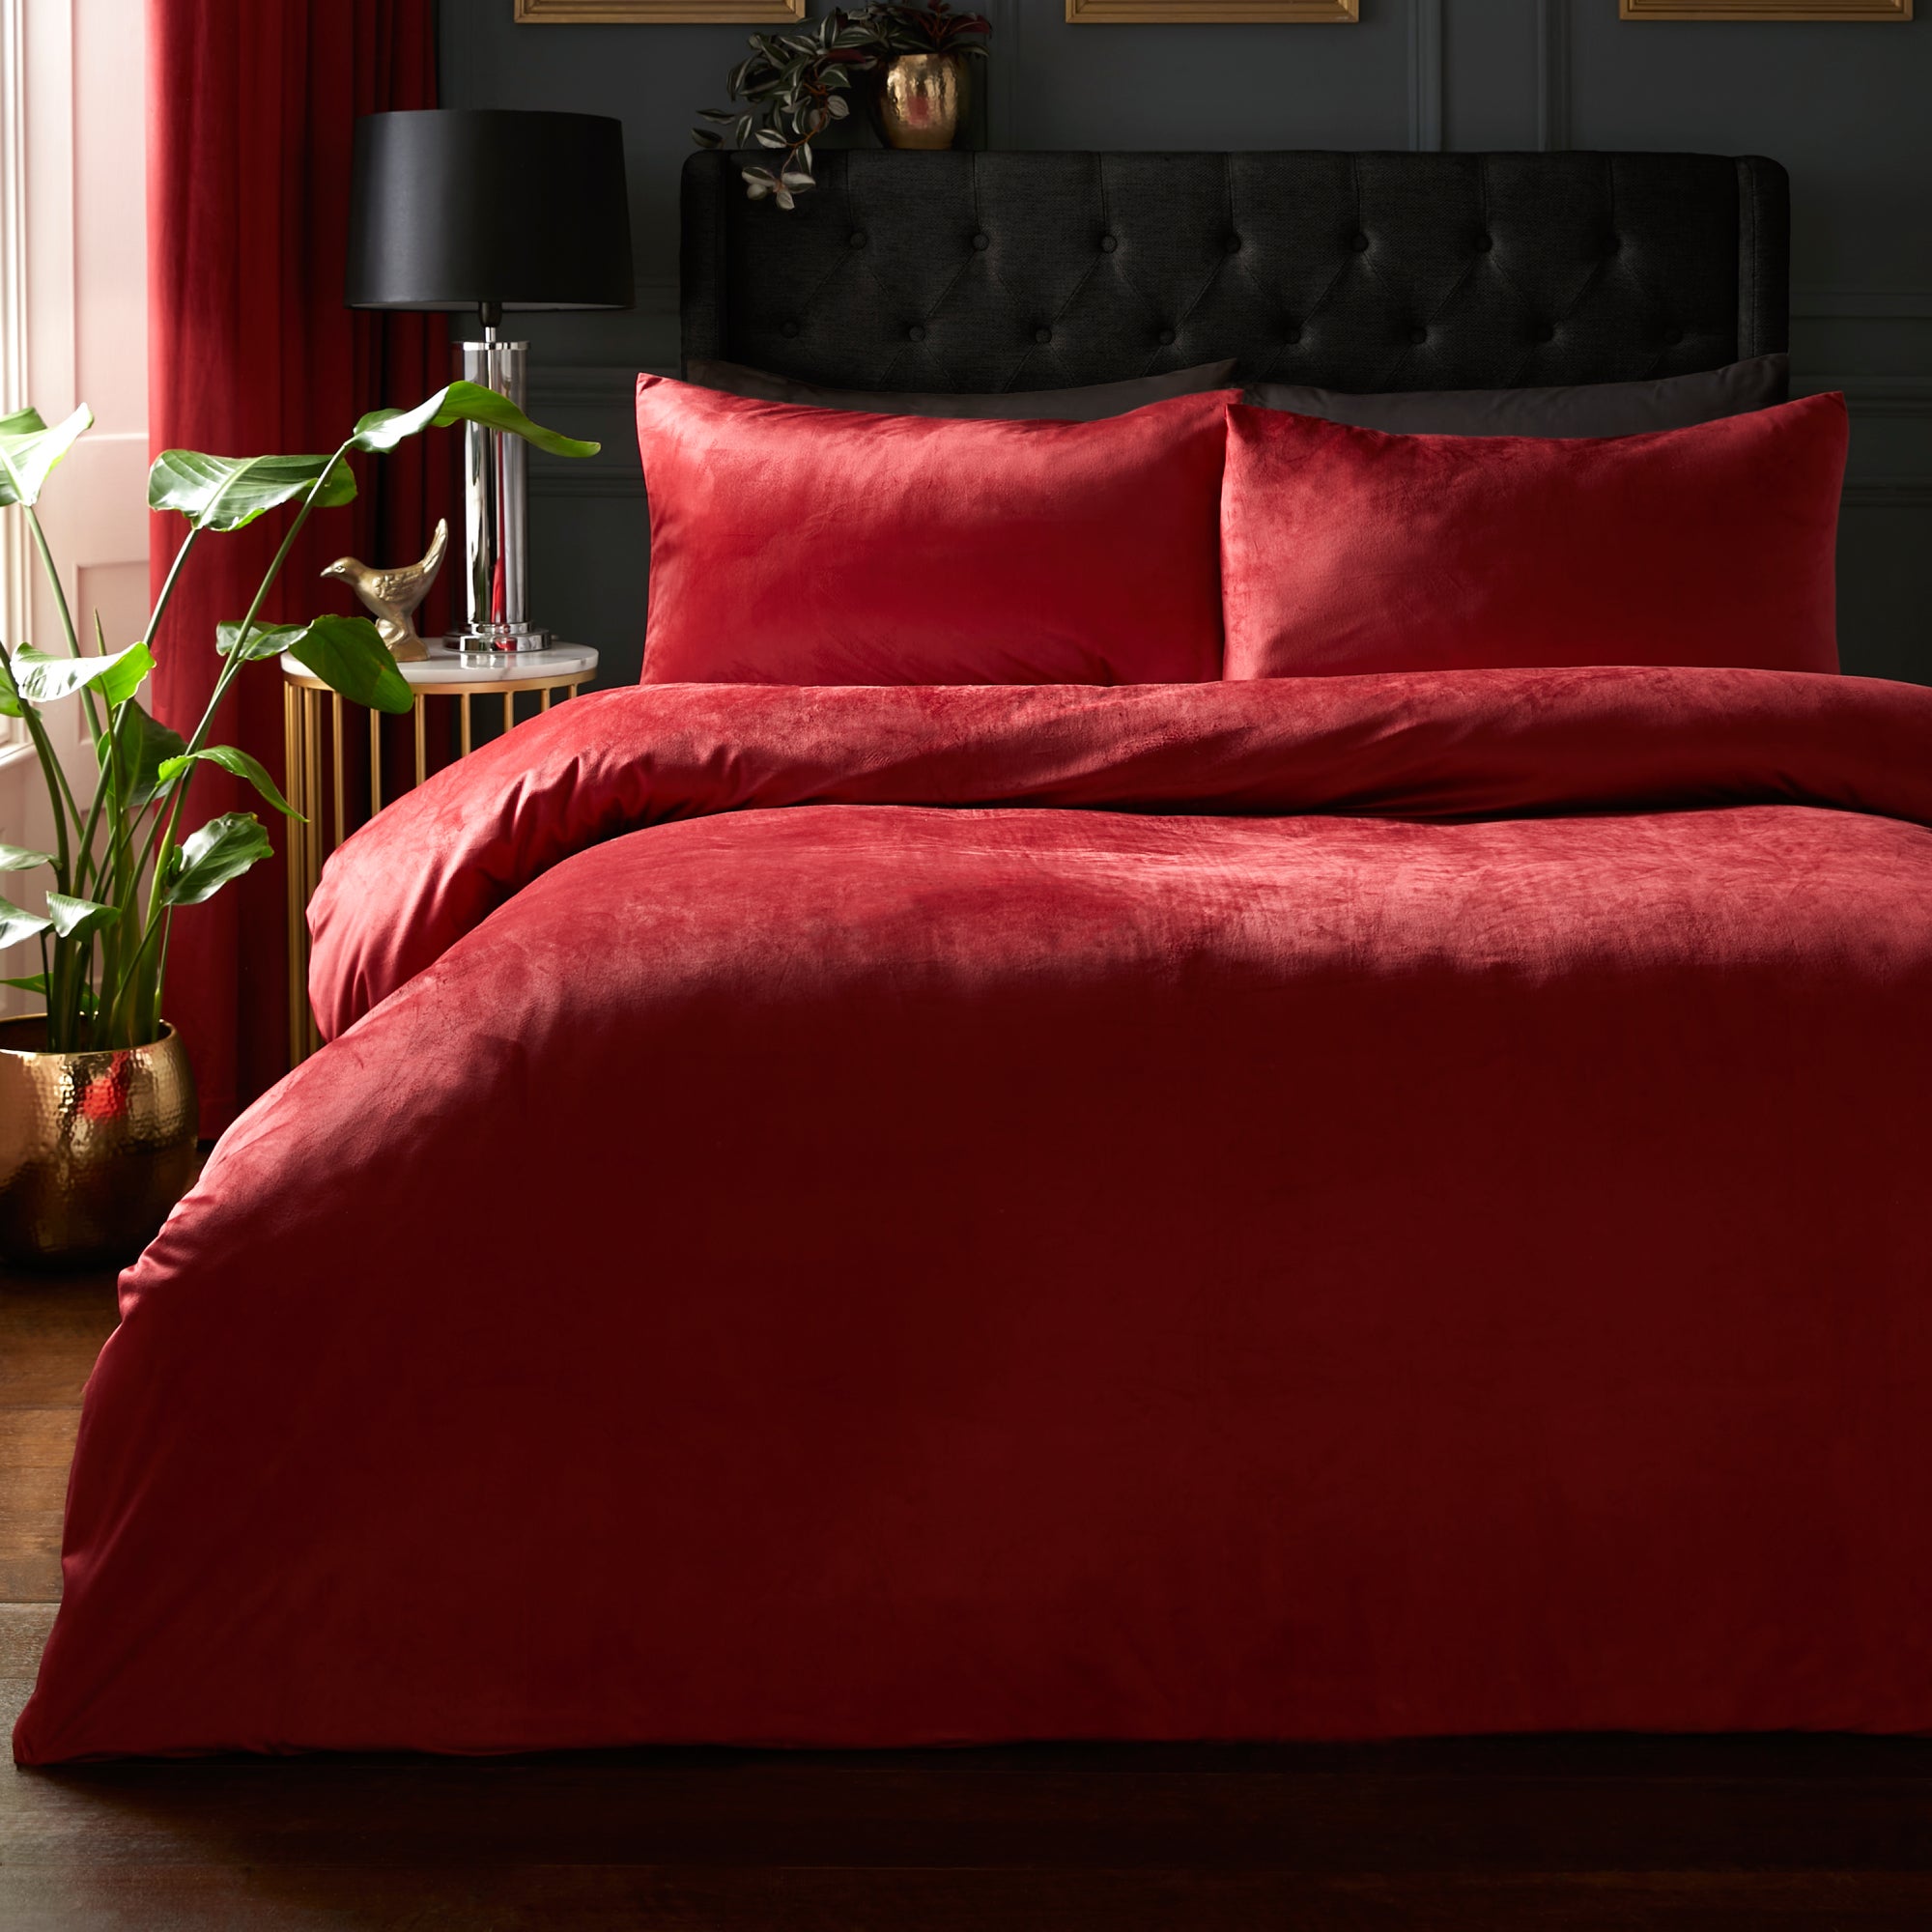 Image of Laurence Llewelyn Bowen Montrose Claret Duvet Cover and Pillowcase Set Claret (Red)